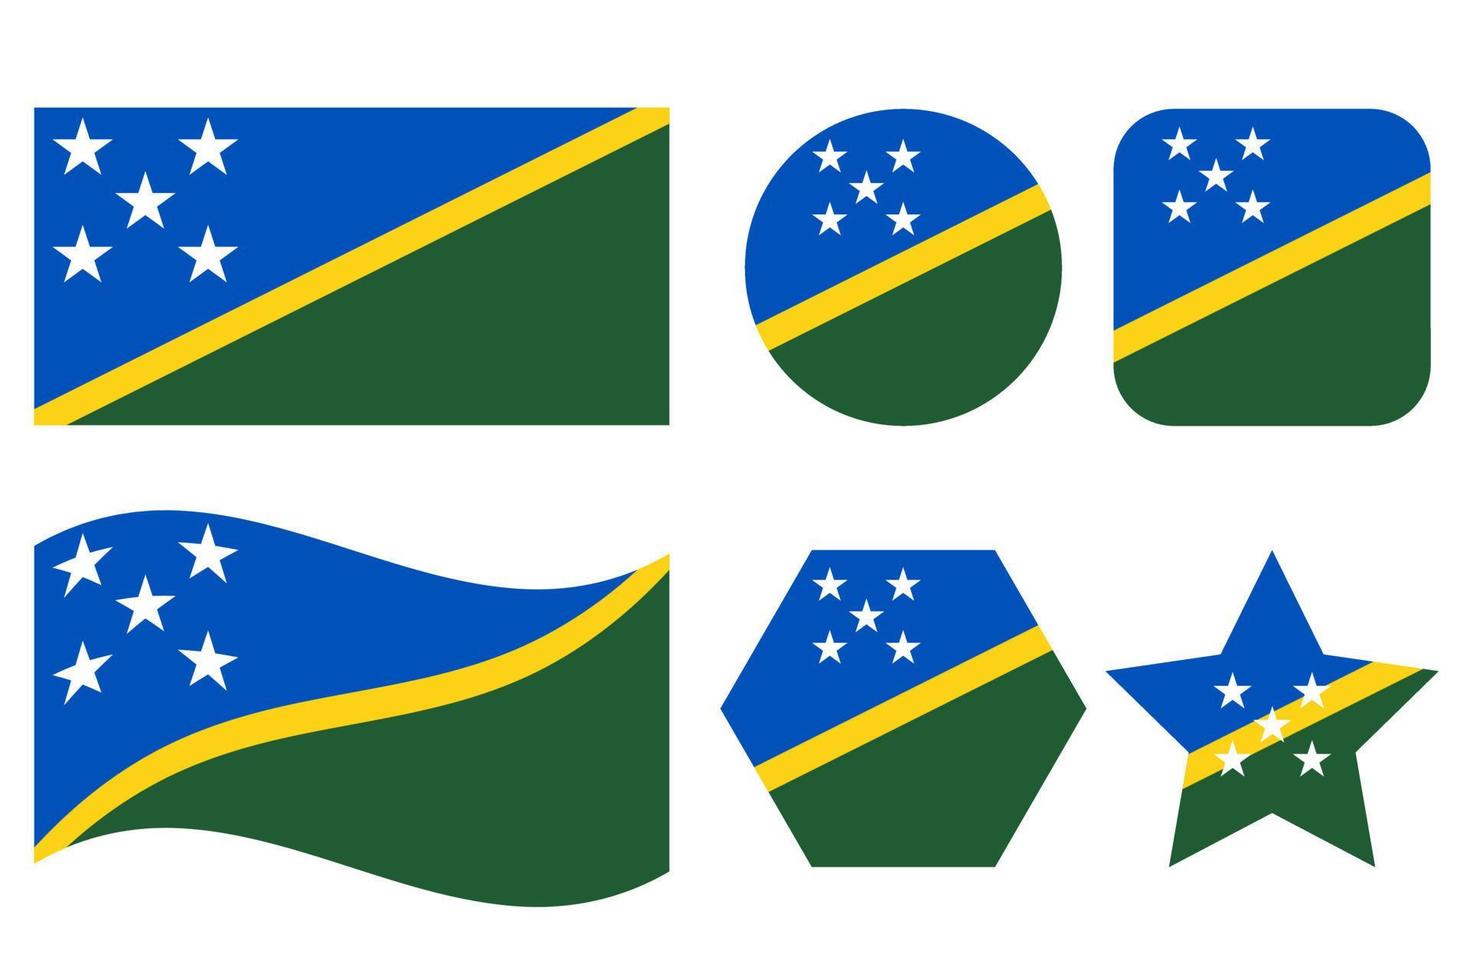 Solomon Islands flag simple illustration for independence day or election vector